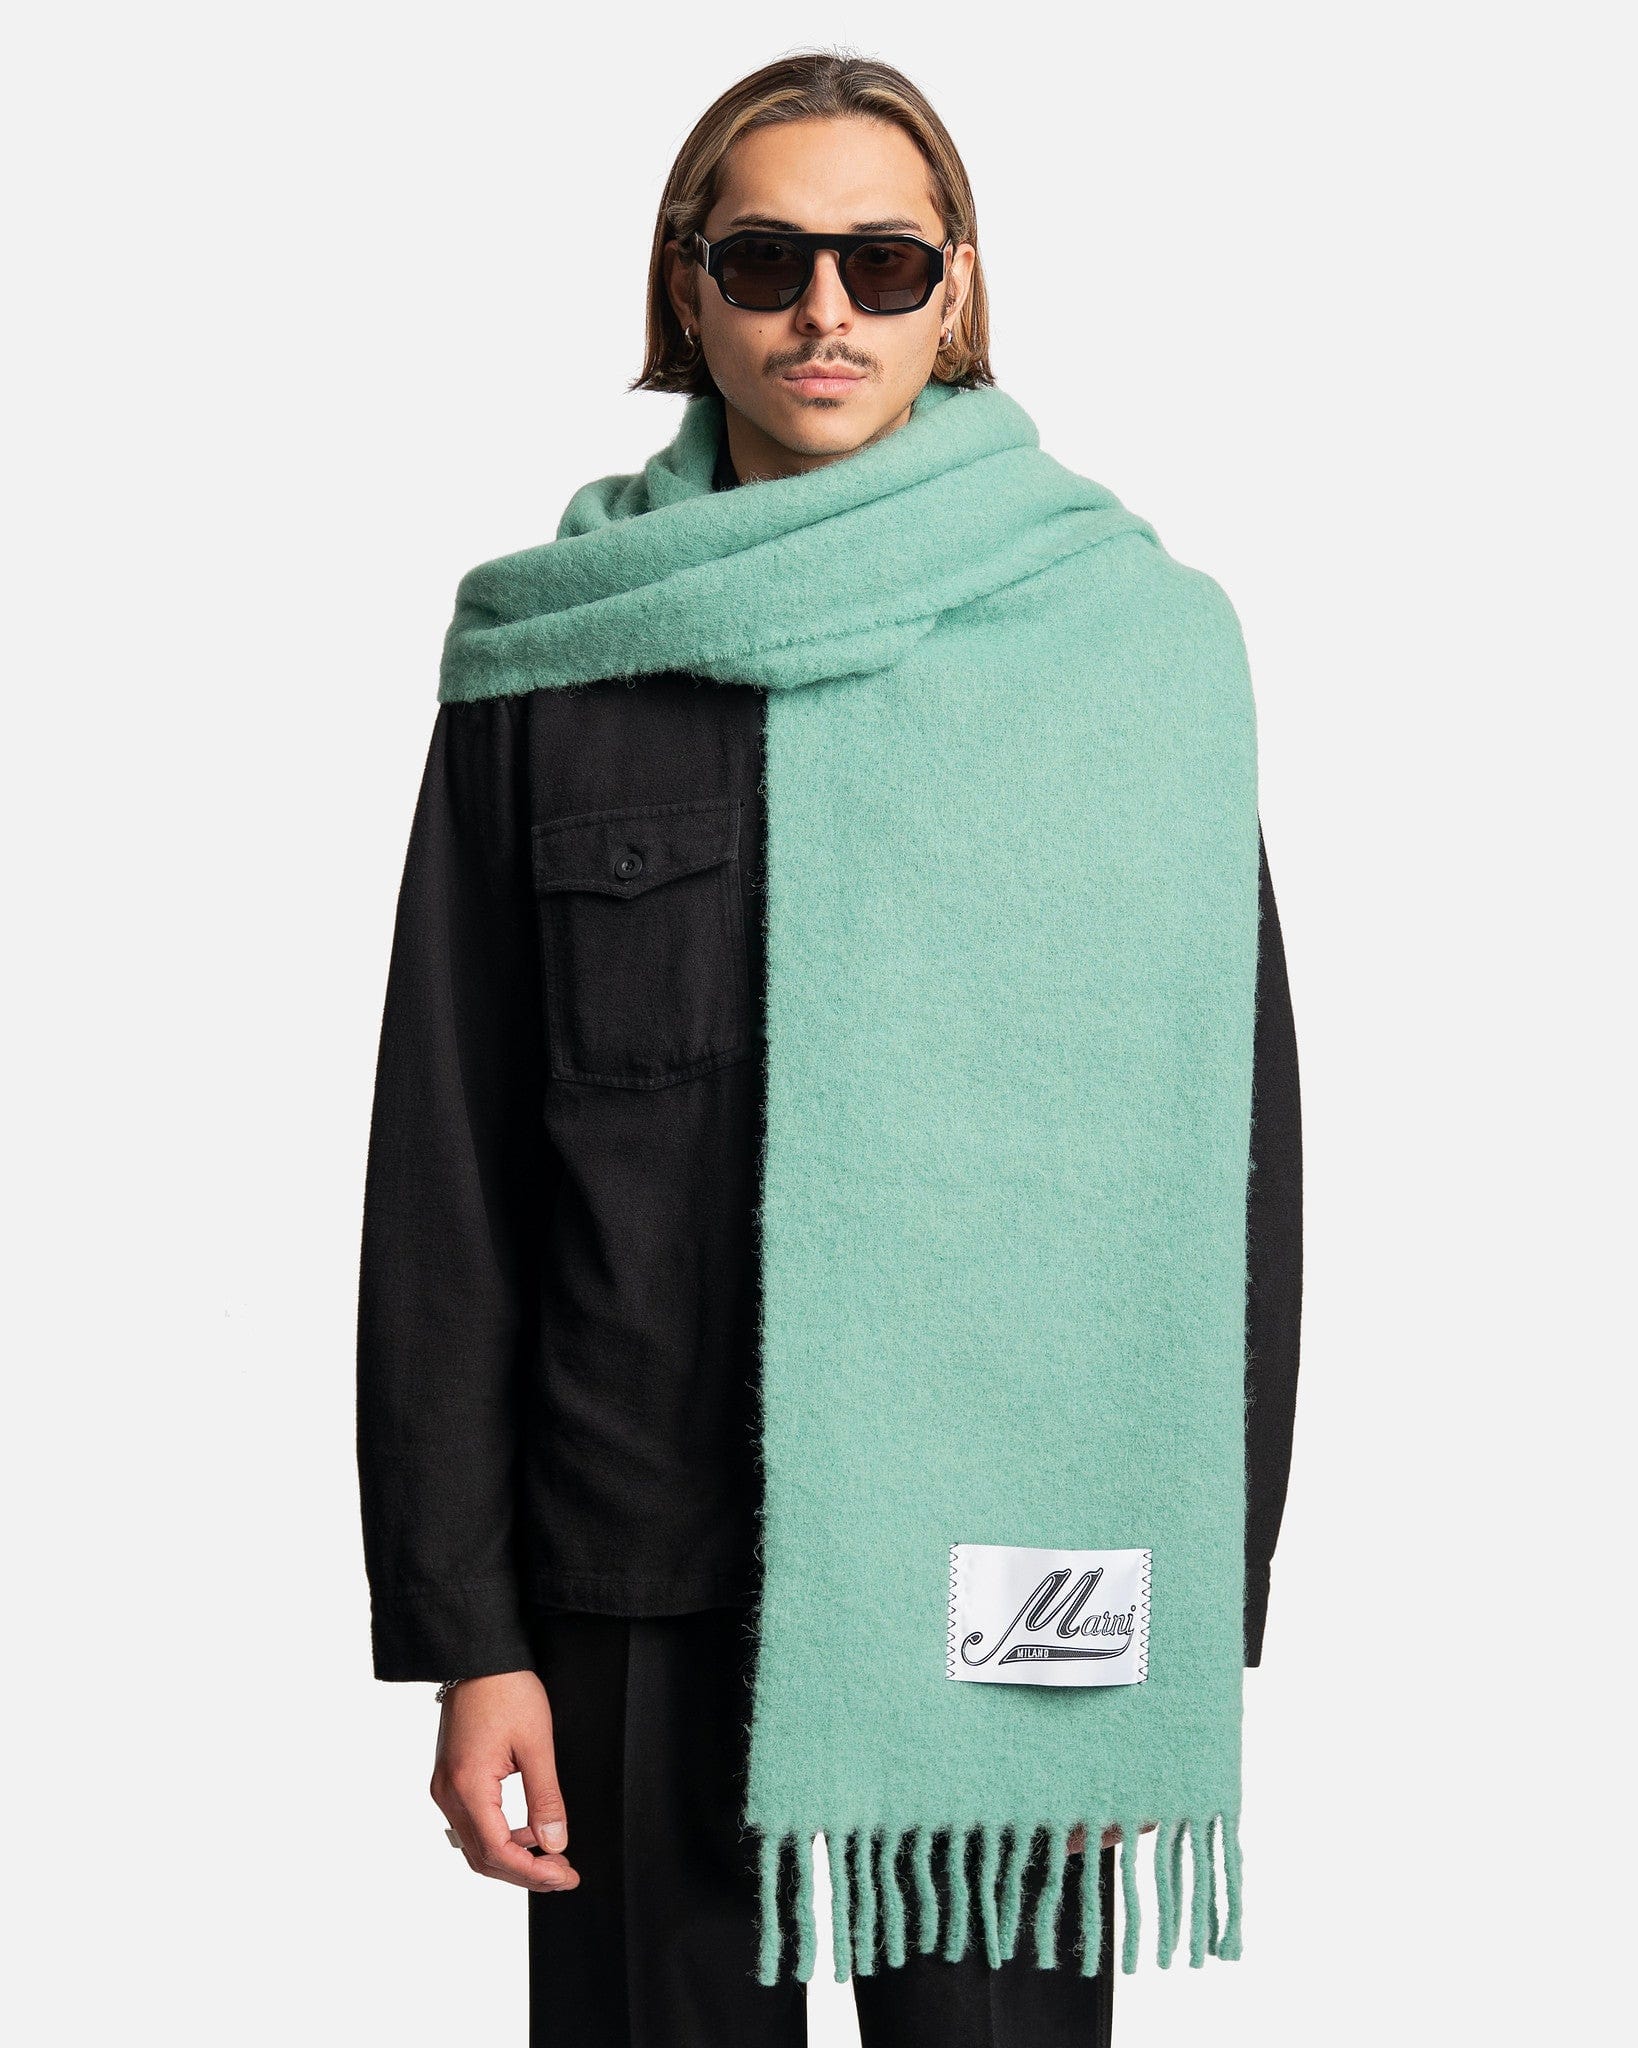 Marni Scarves Brushed Wool Scarf in Spring Green